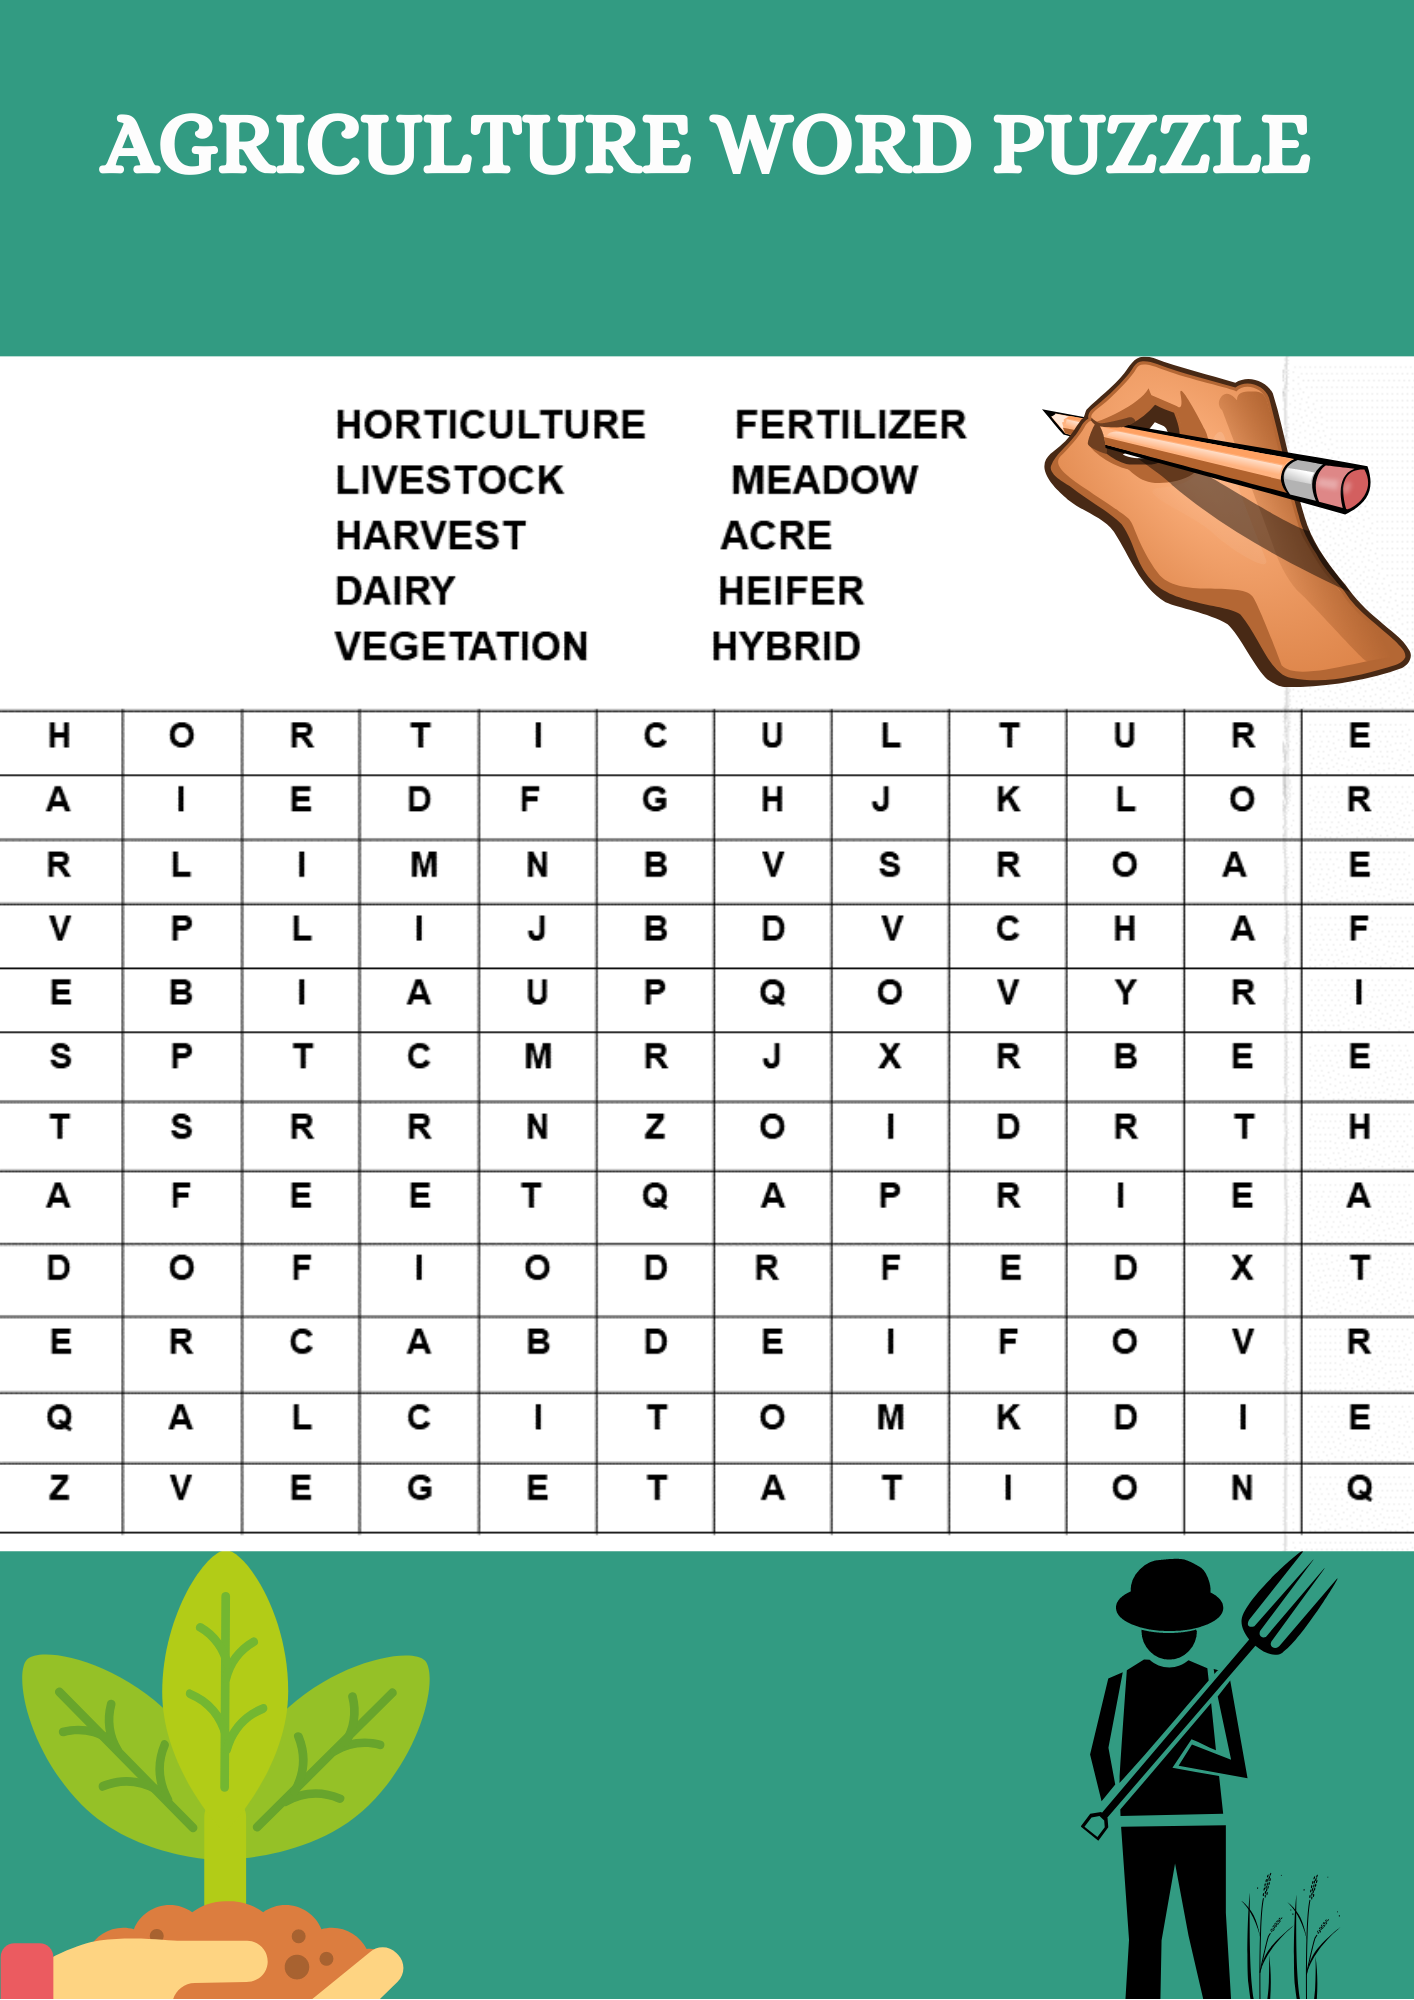 activity sheets for grade 6 tle agriculture